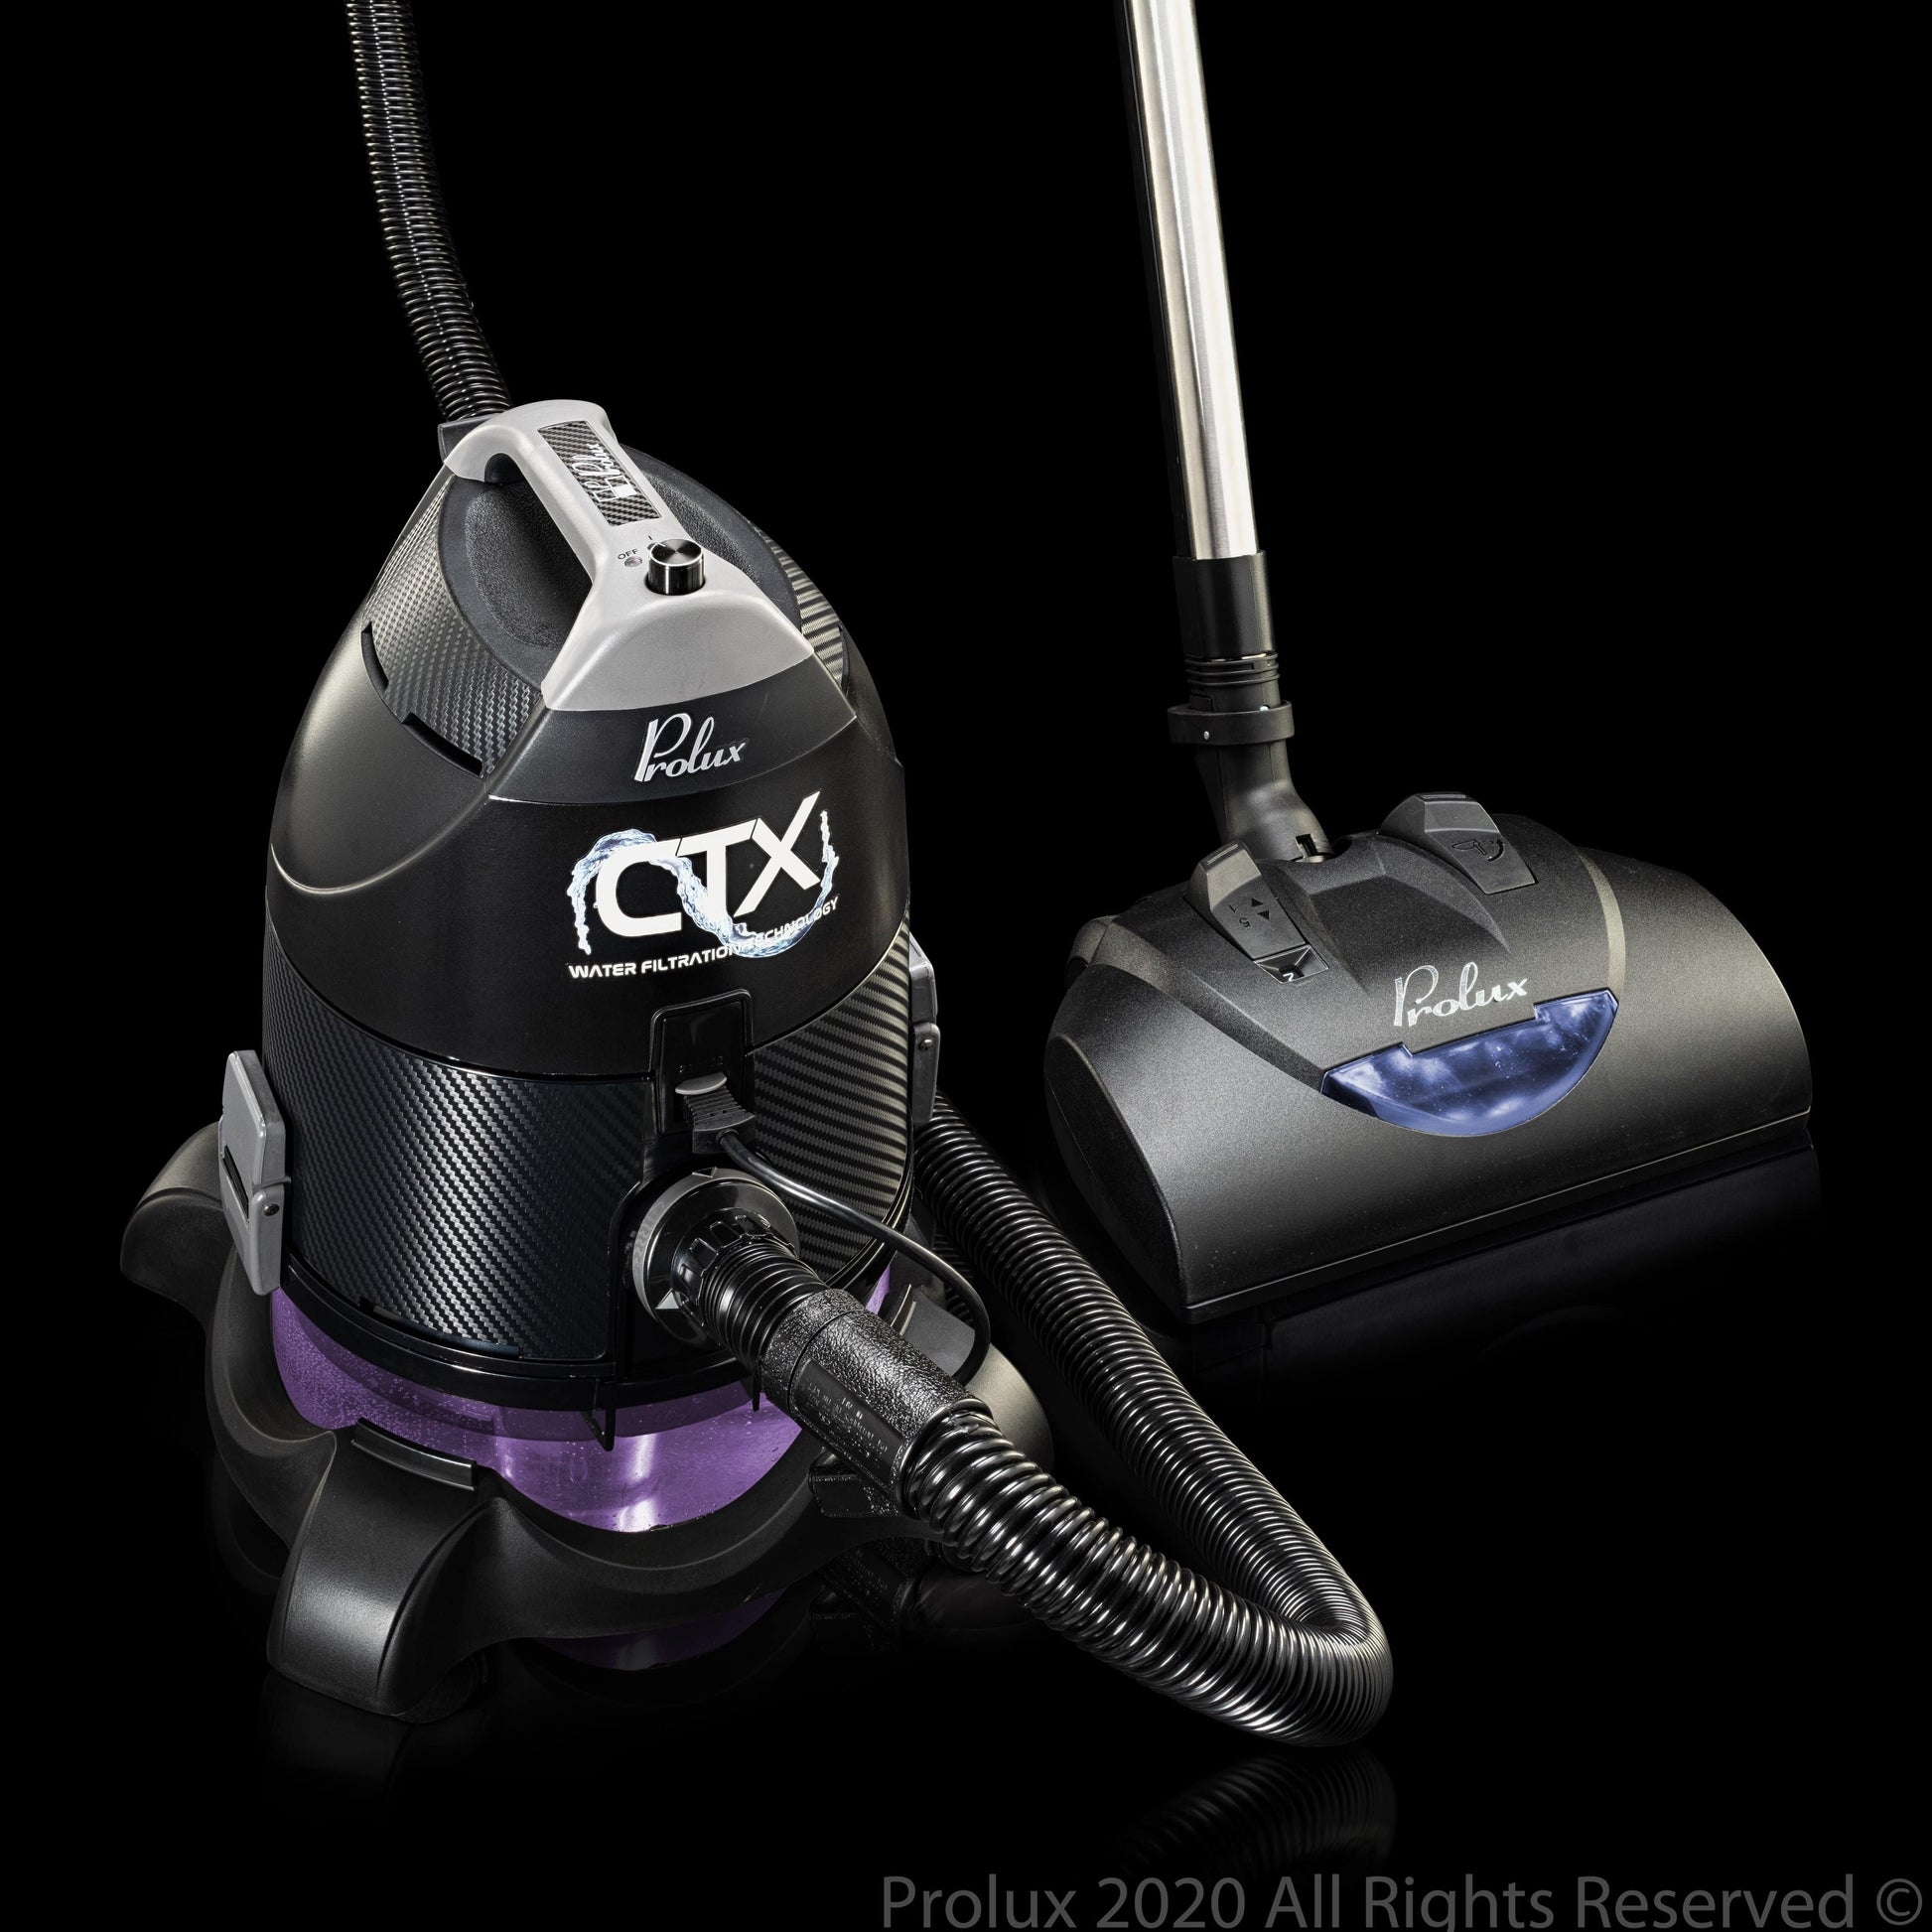 Best Water Filtration Vacuums That Remove Spills